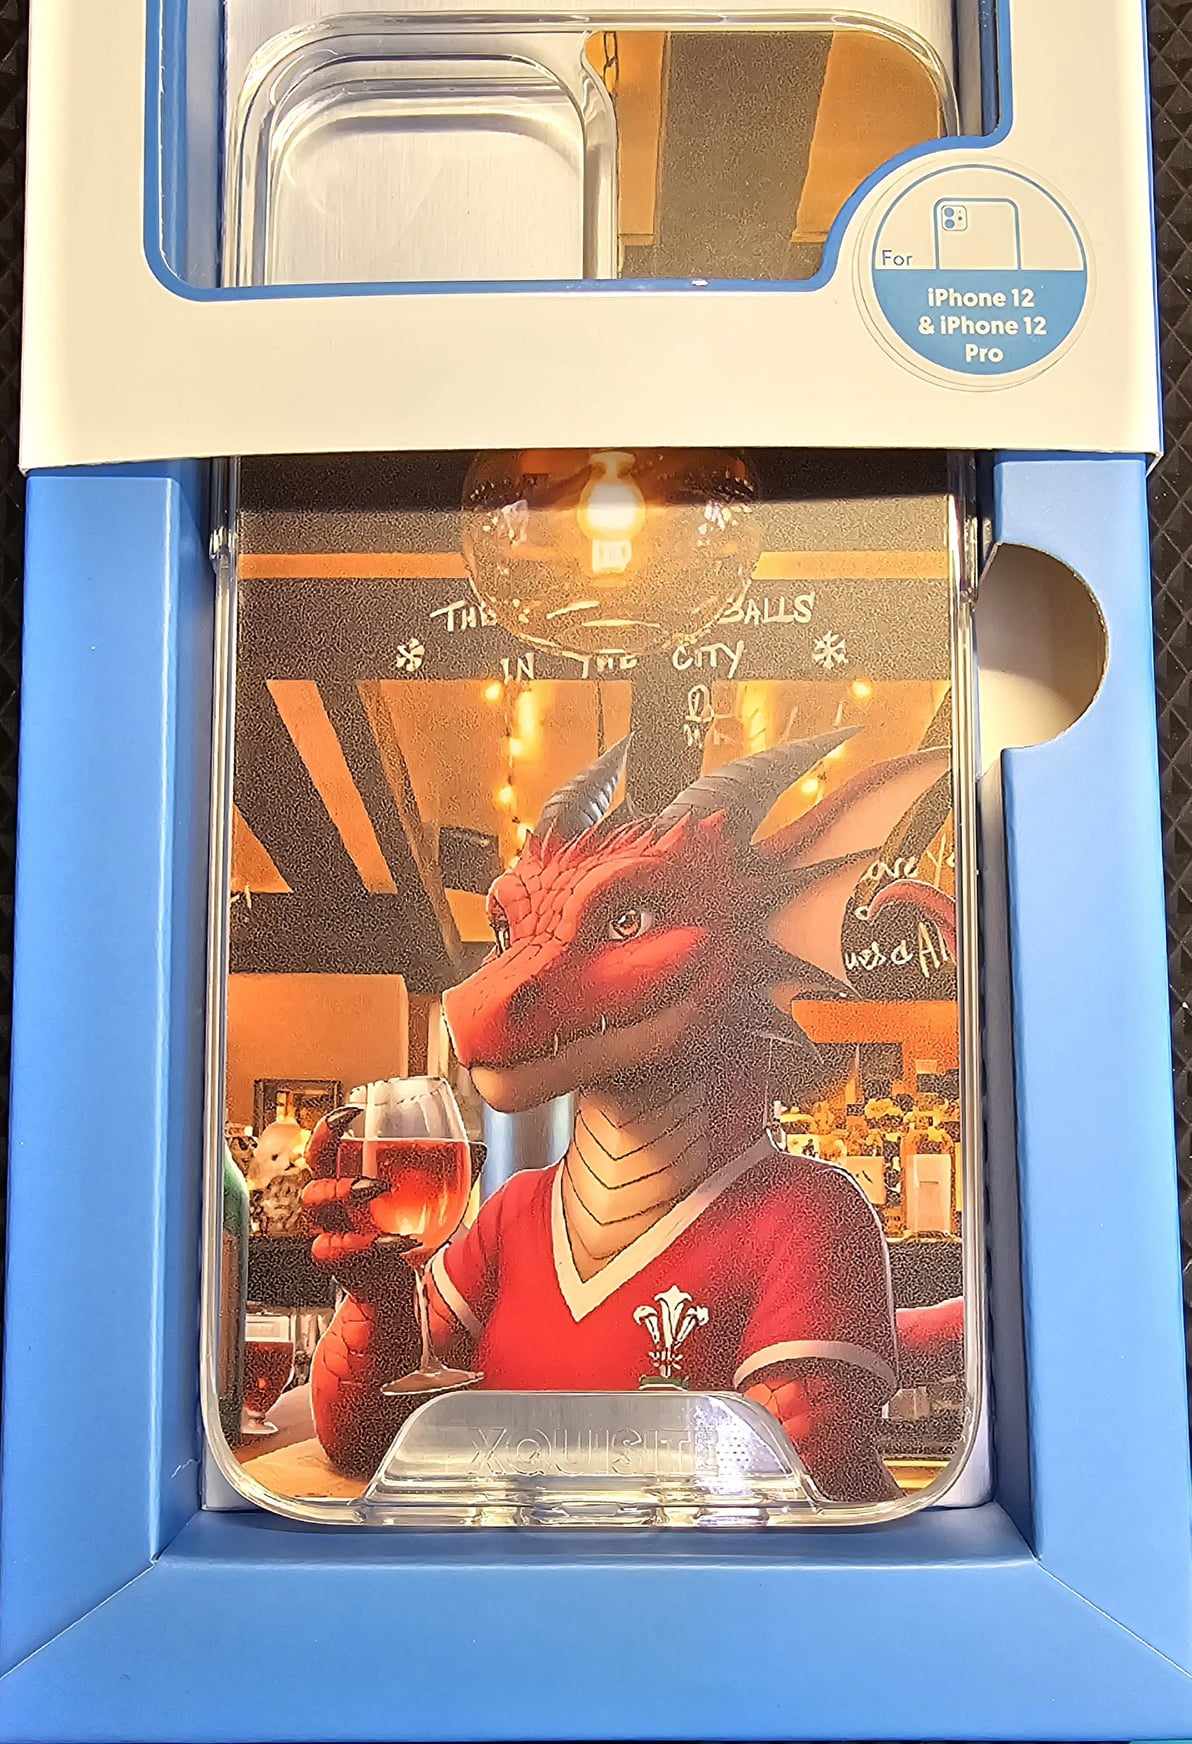 Image of FEMALE WELSH DRAGON A GLASS OF ROSE WITH RUGBY TOP ON PHONE CASE